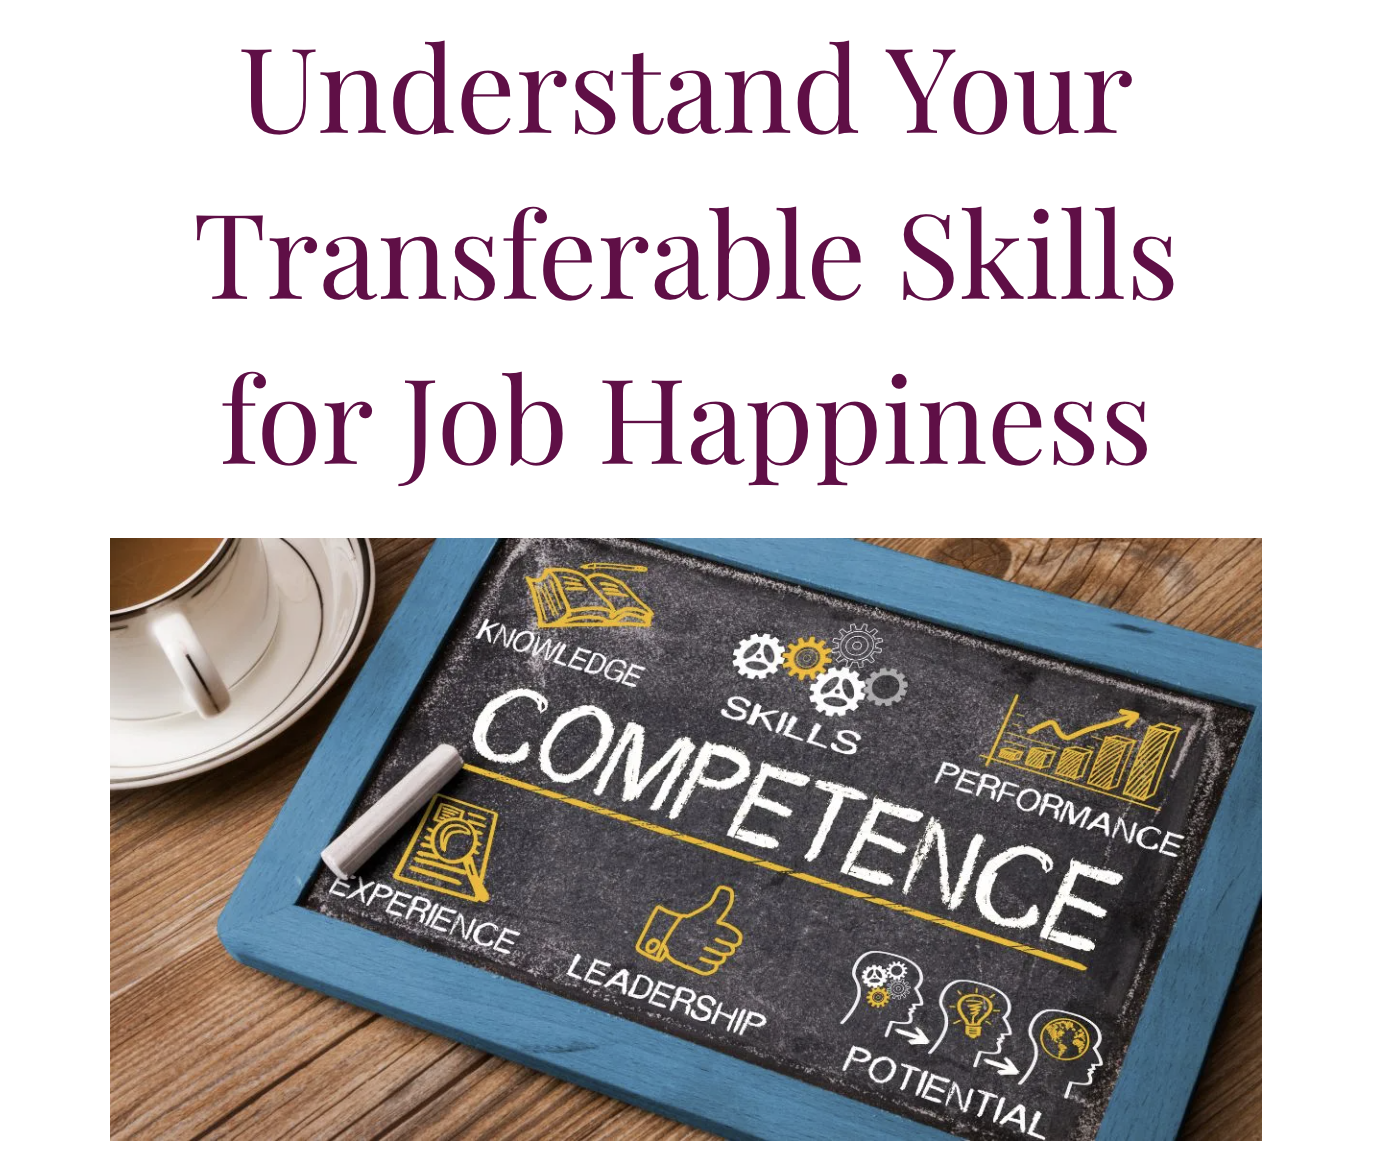 Understand Your Transferable Skills for Job Happiness